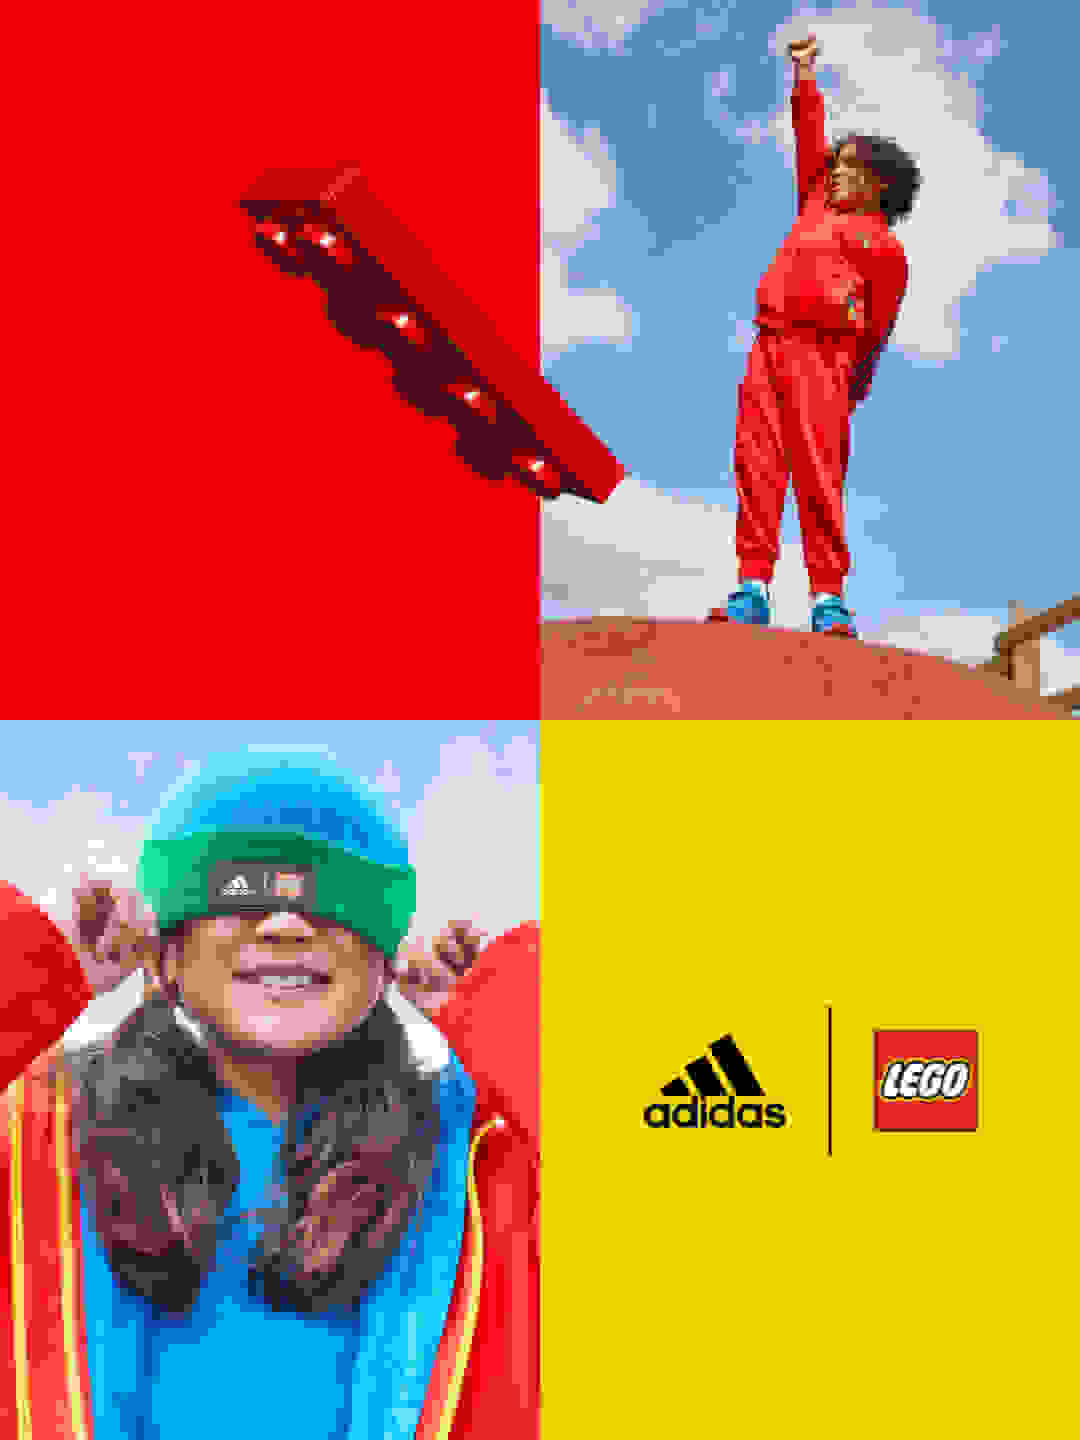 A four-quadrant grid image featuring two models sporting garments from the adidas x LEGO® week collection and a red 3D lego brick.